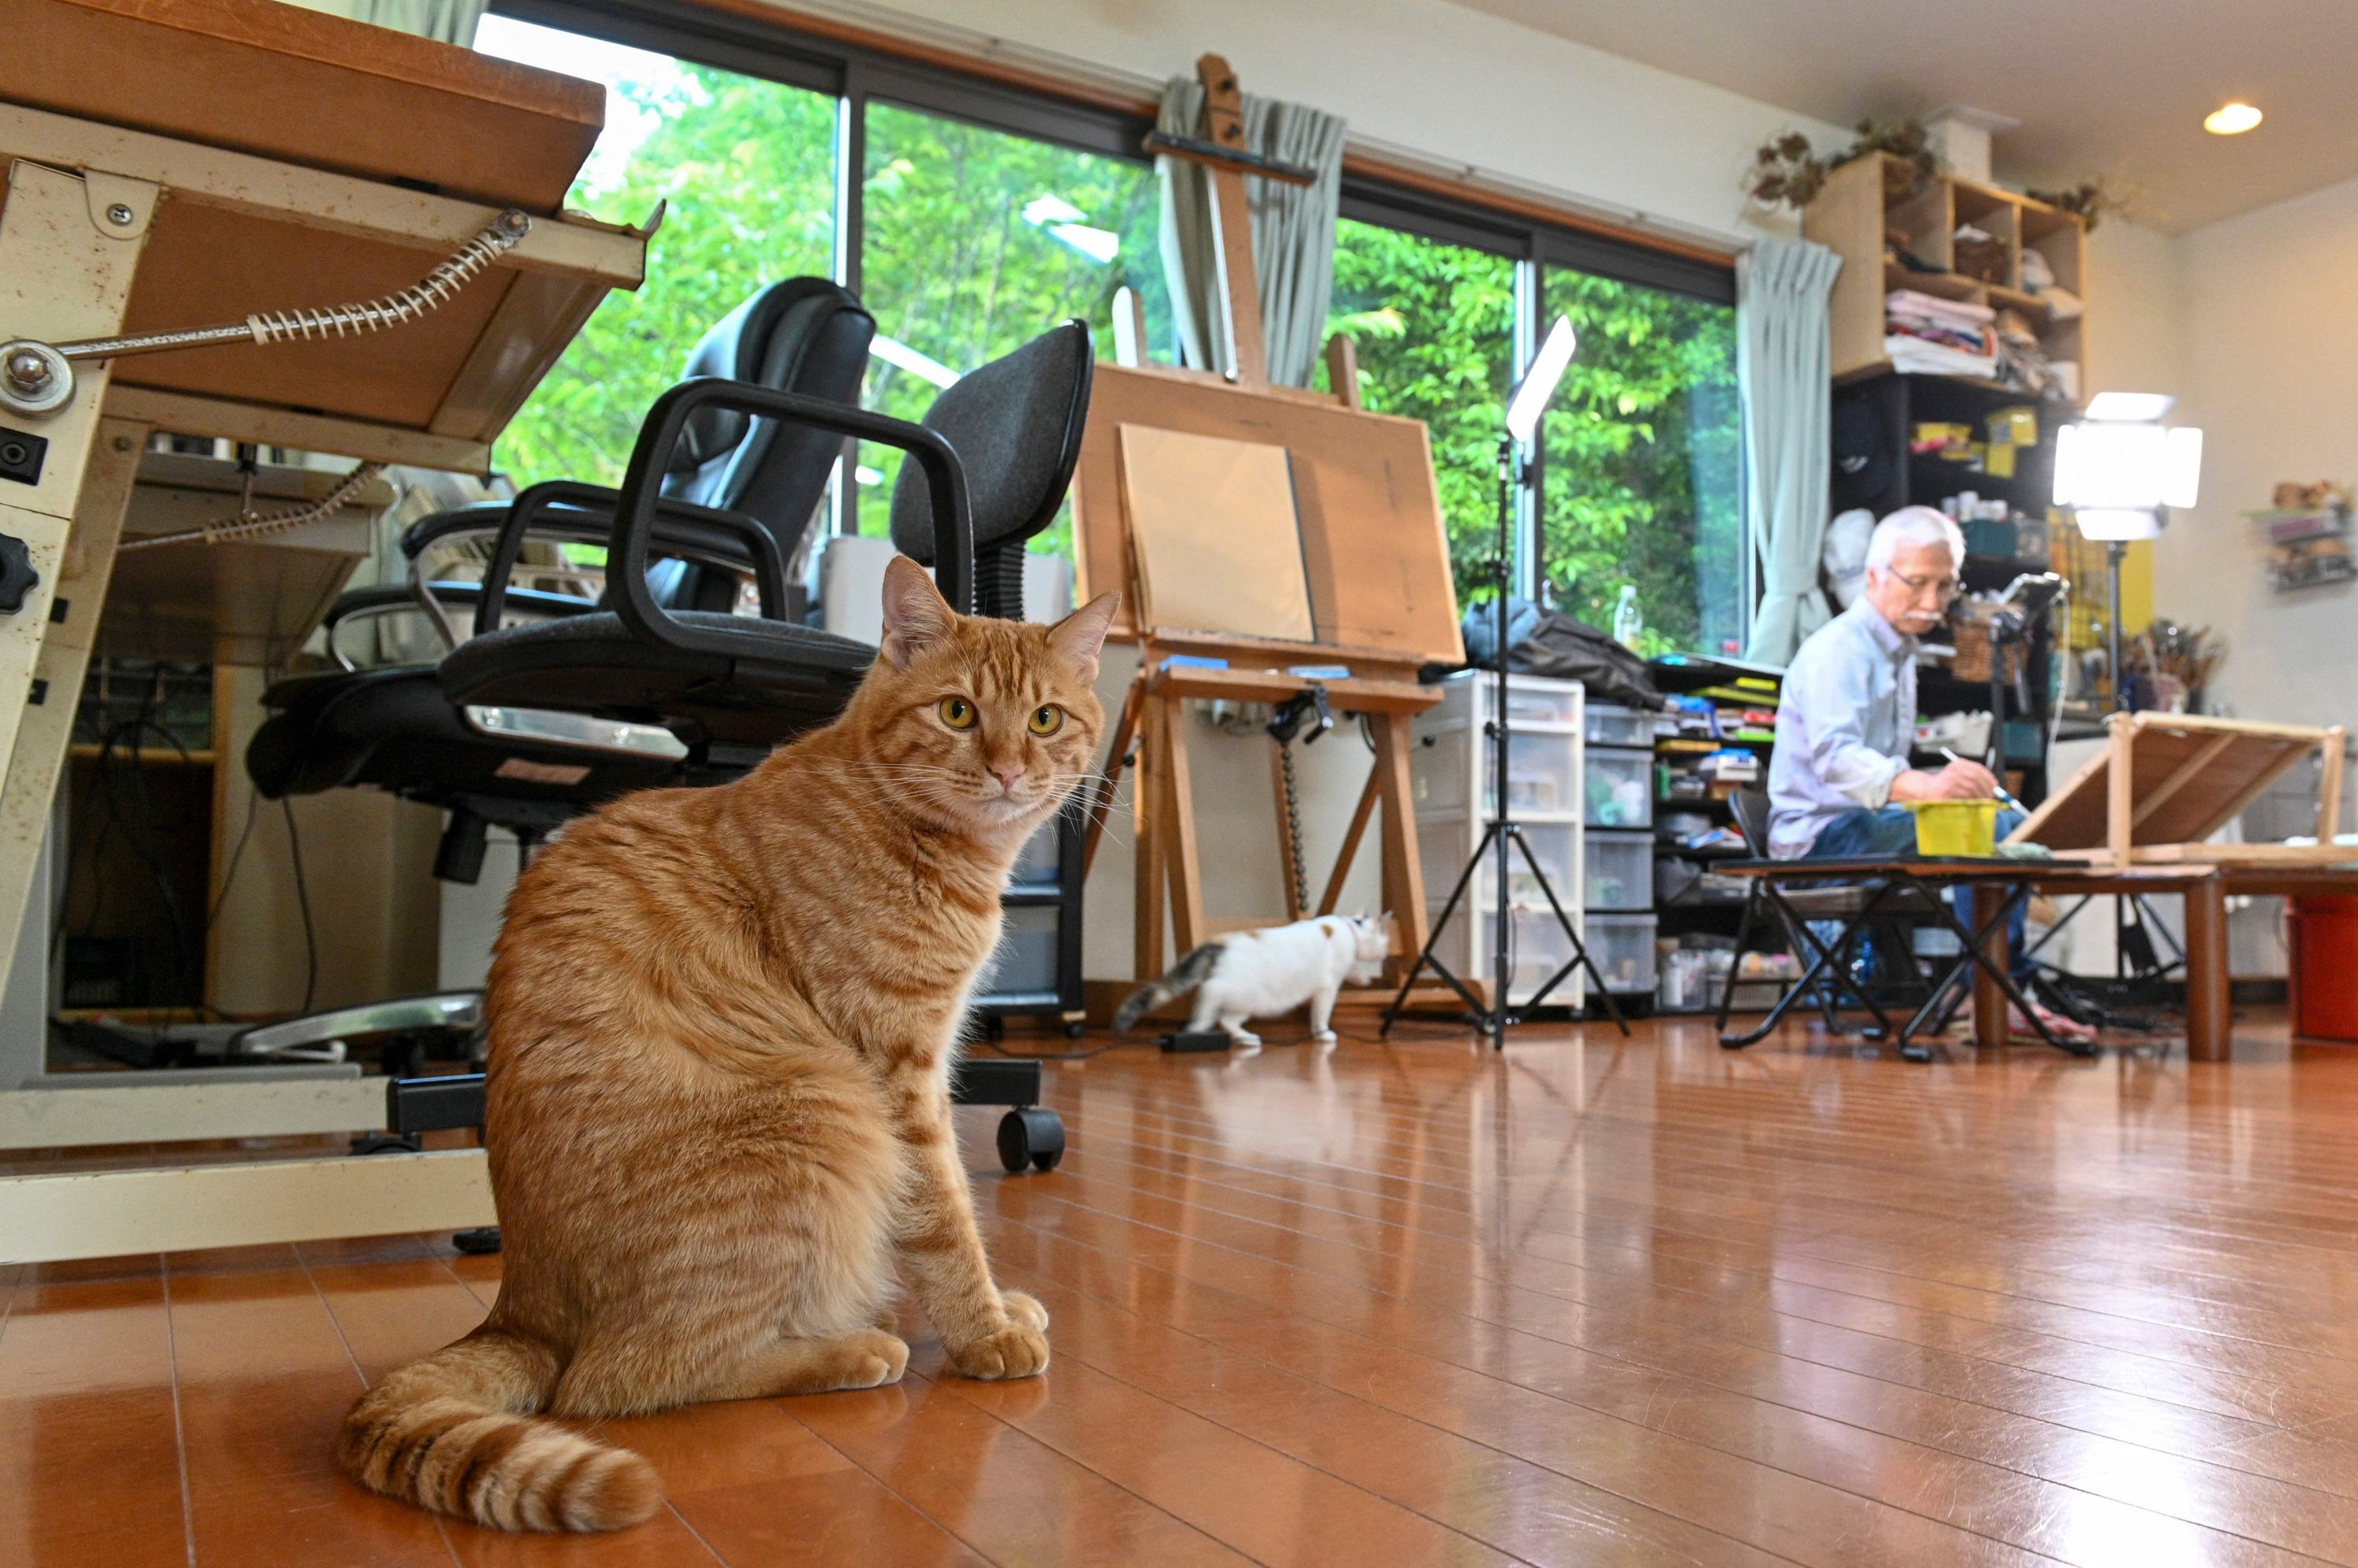 Japanese art instructor Harumichi Shibasaki (R) paints in his atelier as his cats roam about in Isumi, Chiba prefecture, Japan, May 25, 2022. (AFP)